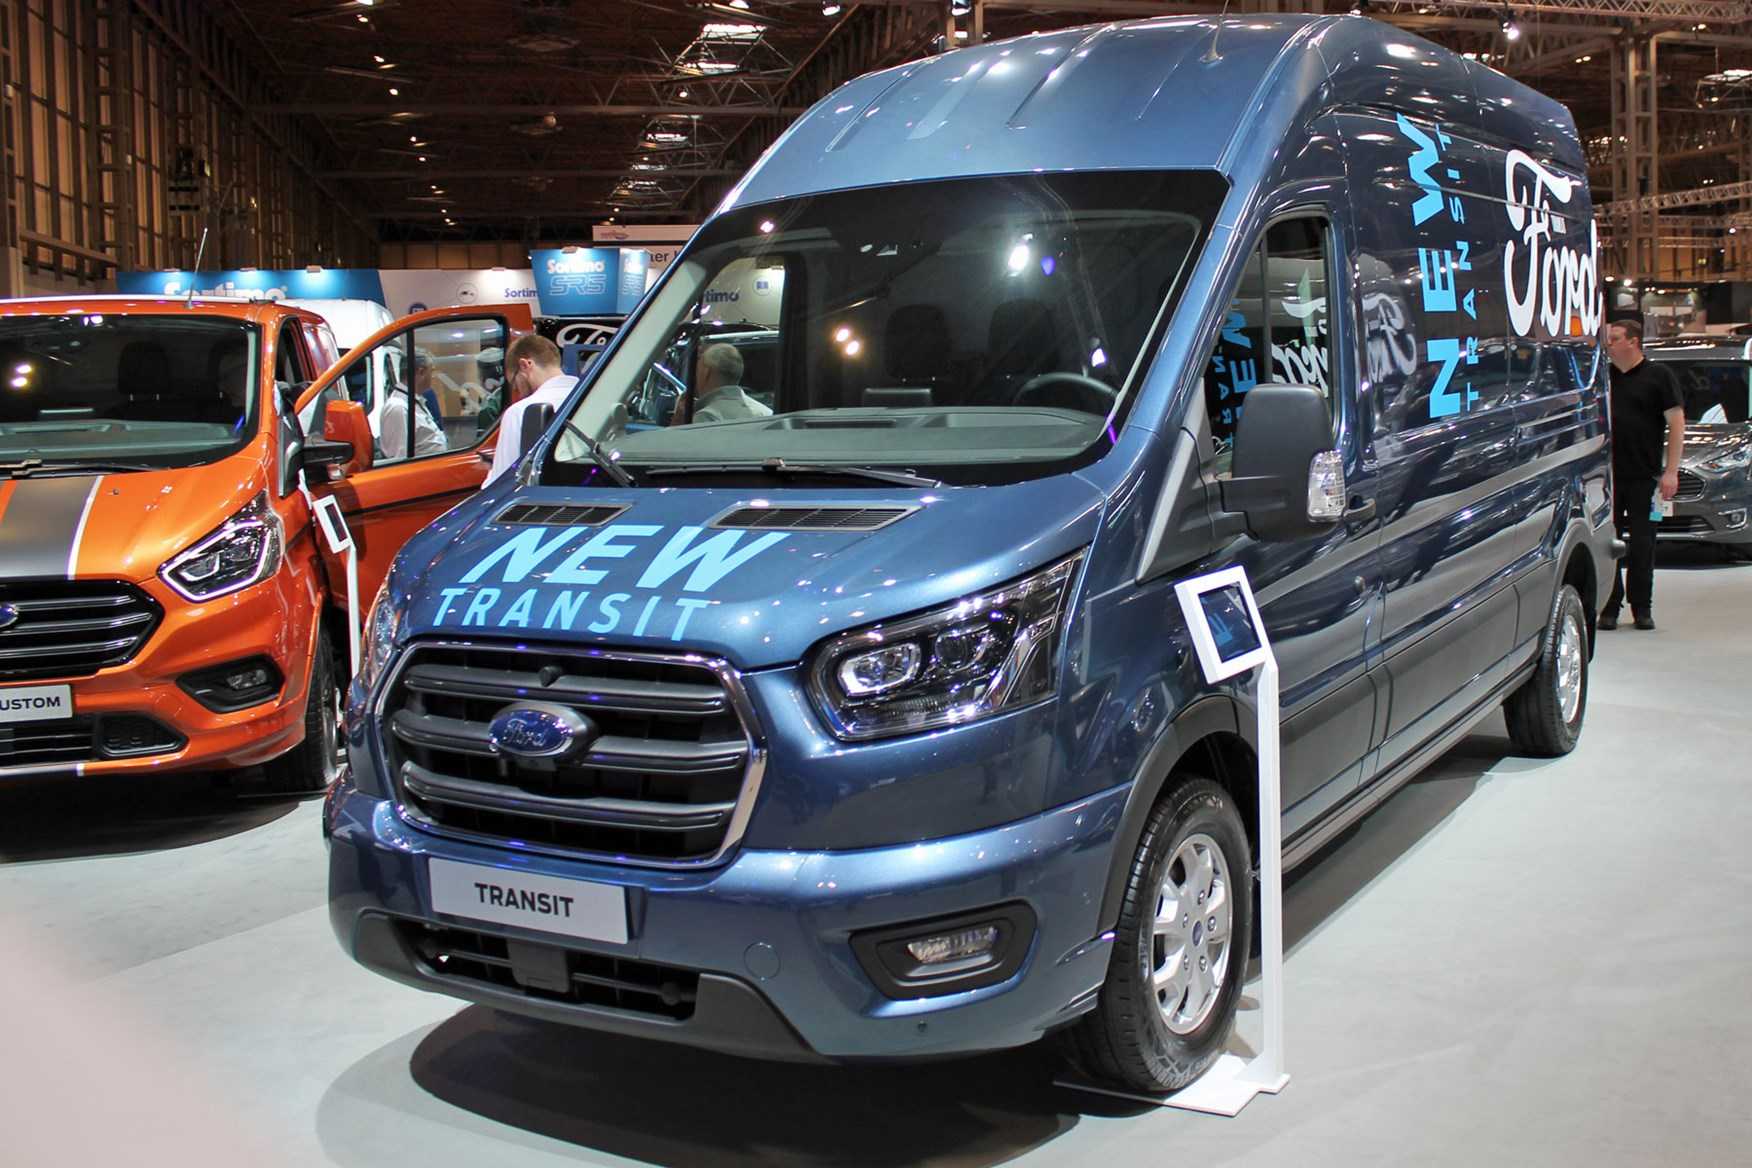 Форд транзит 2021г. Ford Transit 2020. Ford Transit 2017. Ford Transit 2021. Форд Транзит 2019.